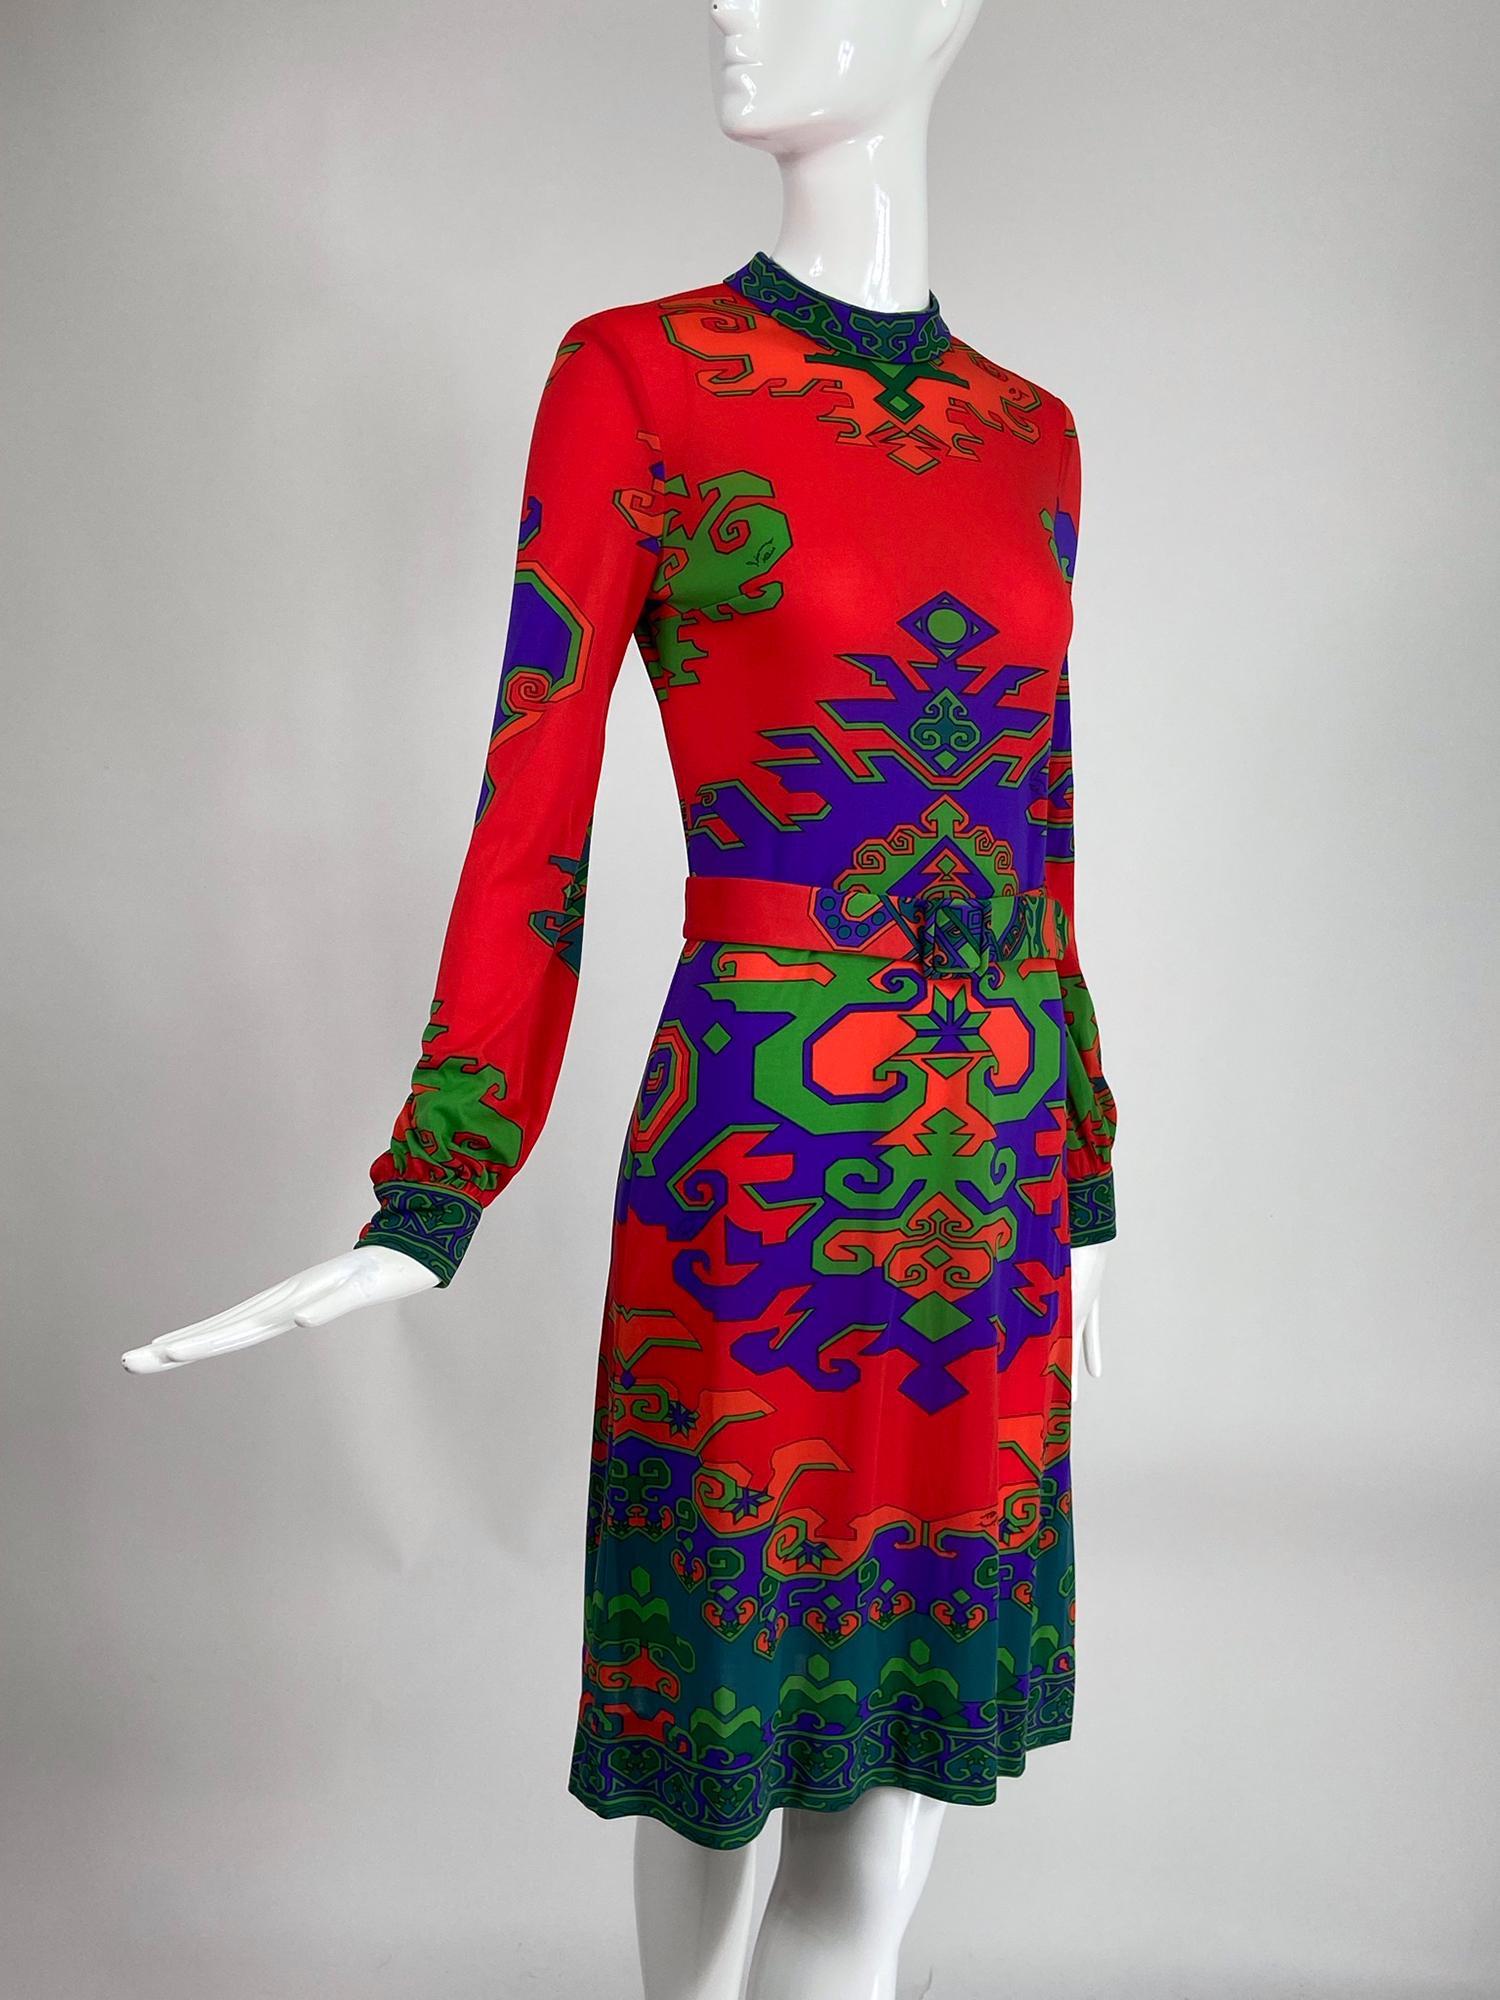 Leonard Fashion Paris silk jersey Geometric design dress from the 1970s. Bold geometric design print pops against the red jersey dress. Mock neck dress has long sleeves that are gathered into banded cuffs that close with 2 self buttons, the dress